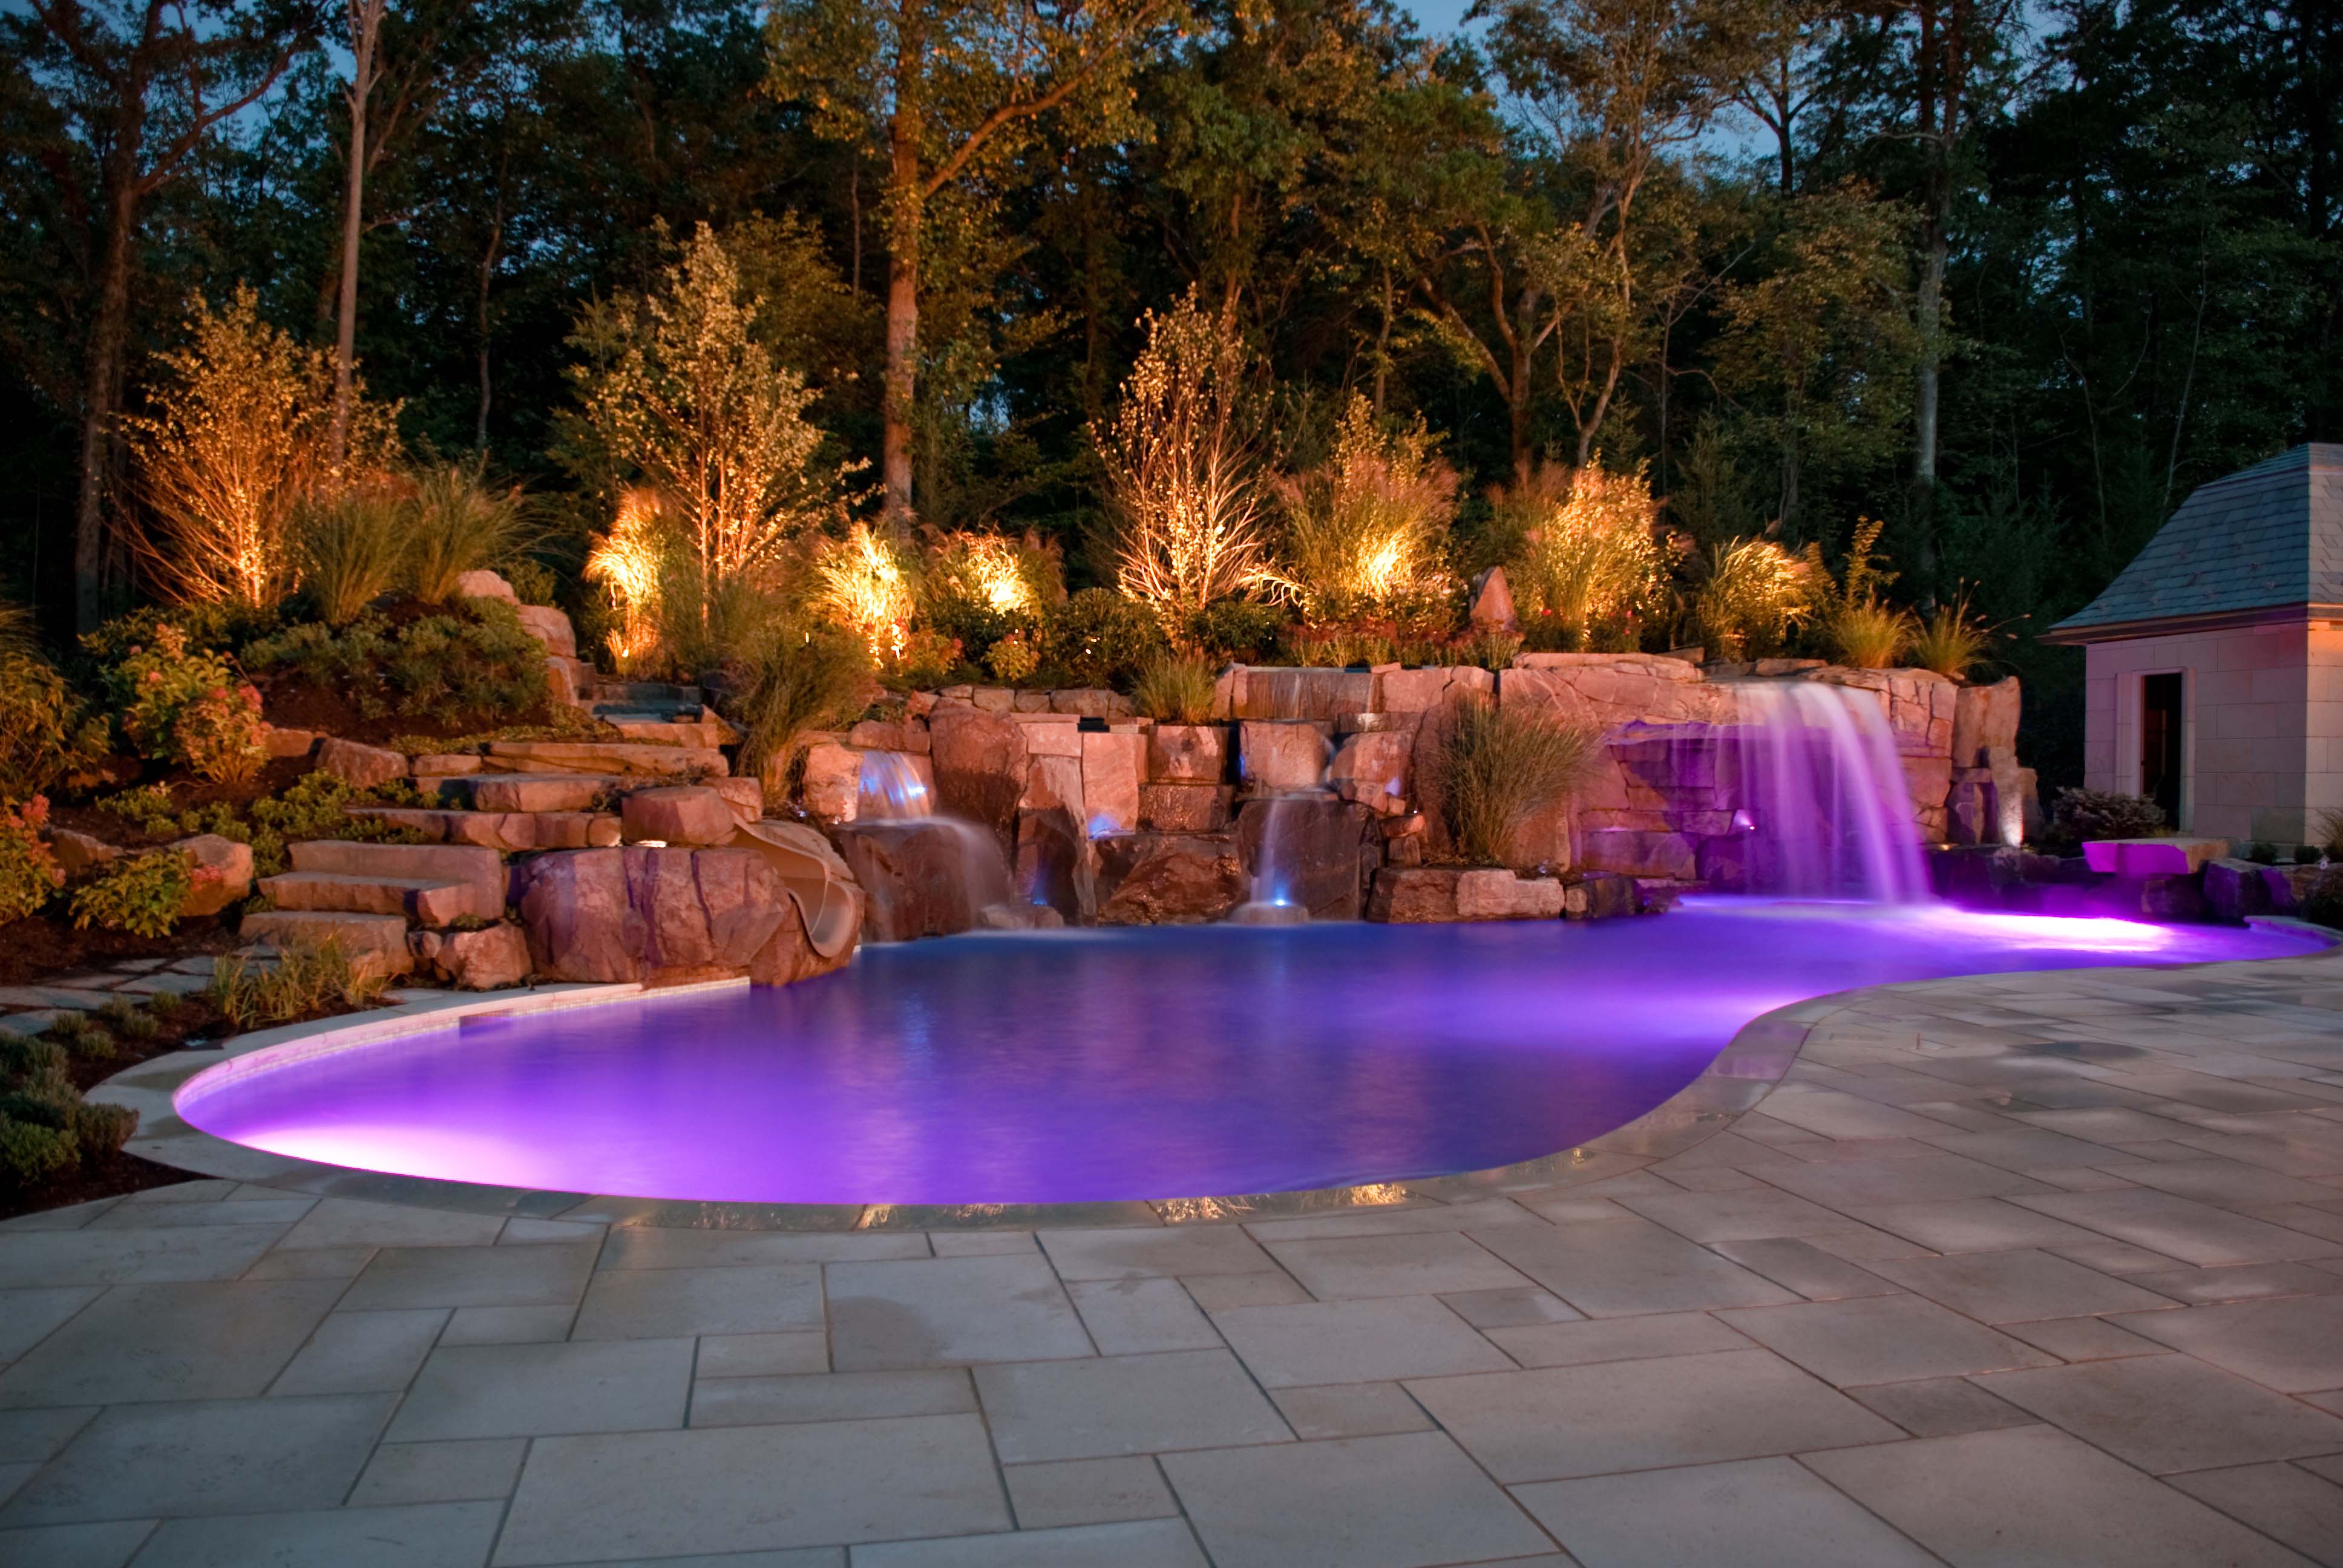 Glass Tile Swimming Pool Designs Earn New Jersey Based Cipriano Custom